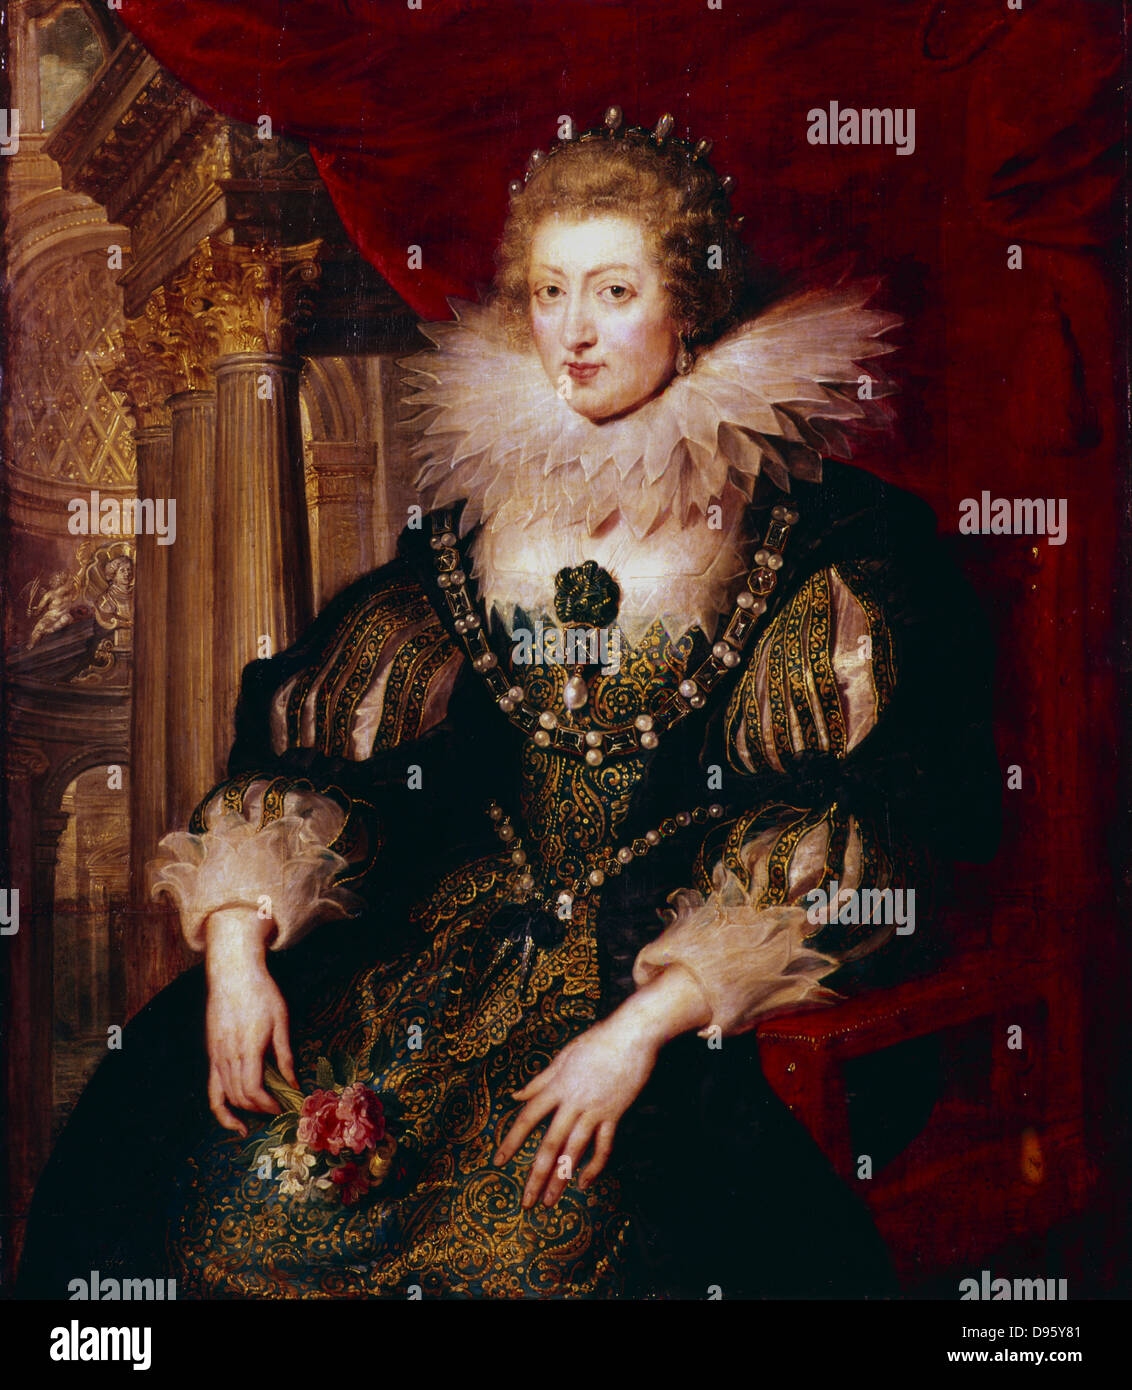 Anne of Austria (1601-1666) married Louis XIII of France 1615.  Mother of ouis XIV.  Peter Paul Rubens (1577-1640) Flemish artist.   Louvre, Paris. Stock Photo